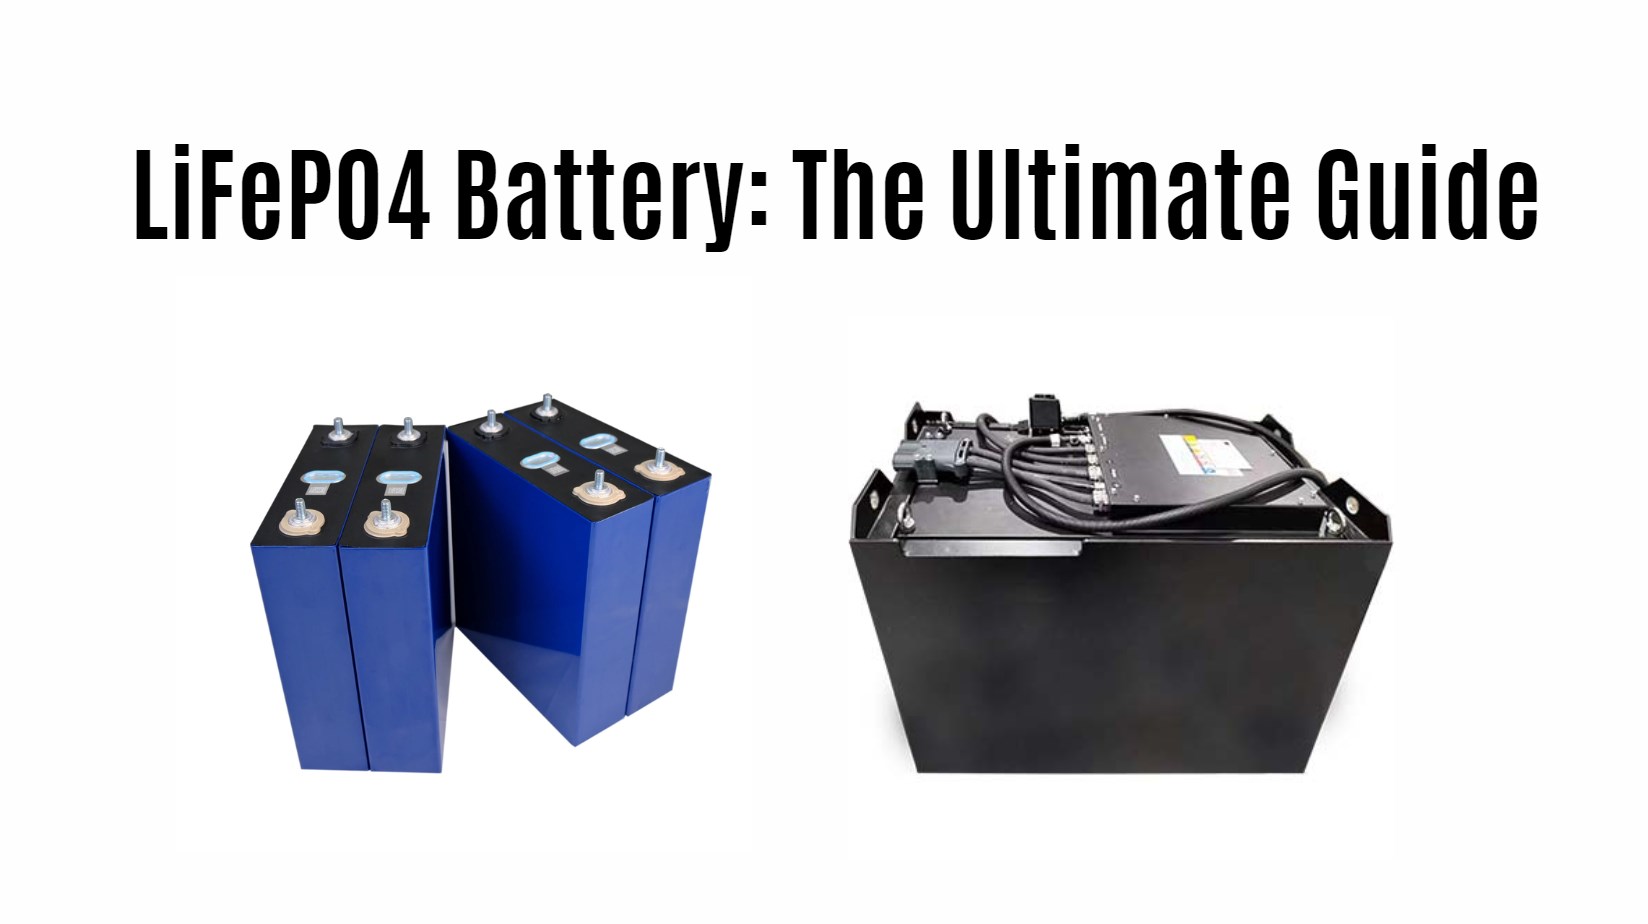 LiFePO4 Battery: The Ultimate Guide. forklift lithium battery factory manufacturer redway power oem